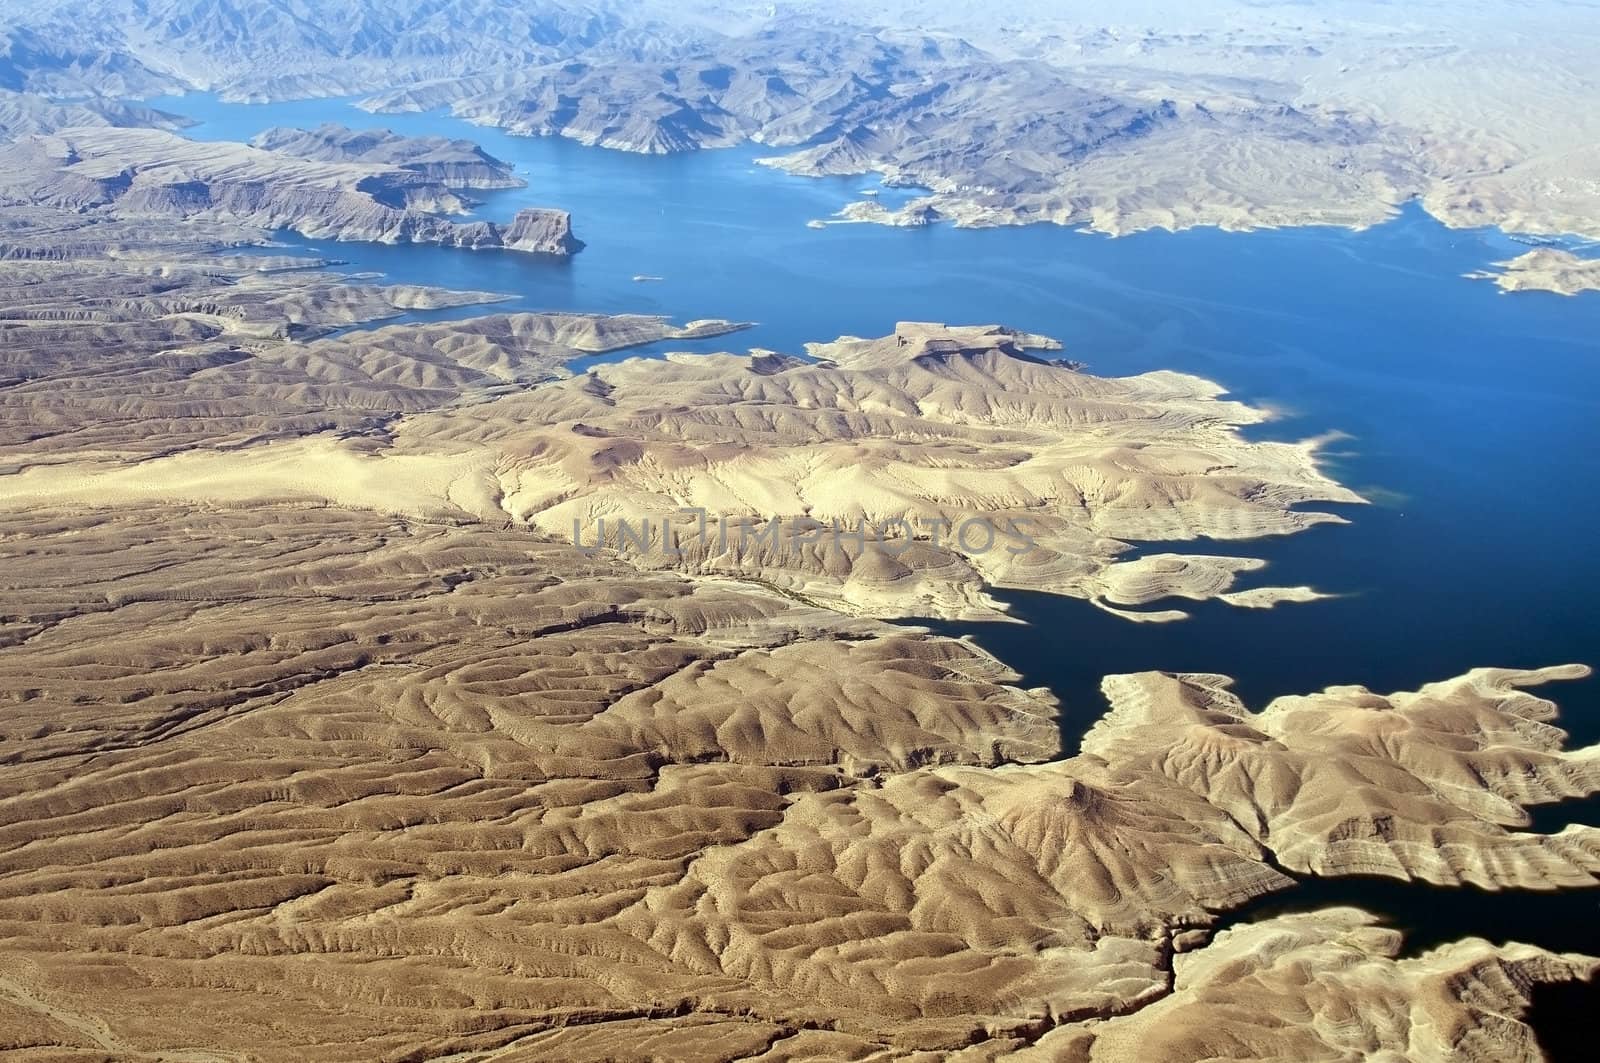 Aerial view of the Colorado River and Lake Mead, a snapshot taken from a helicopter on the border of Arizona and Nevada, USA